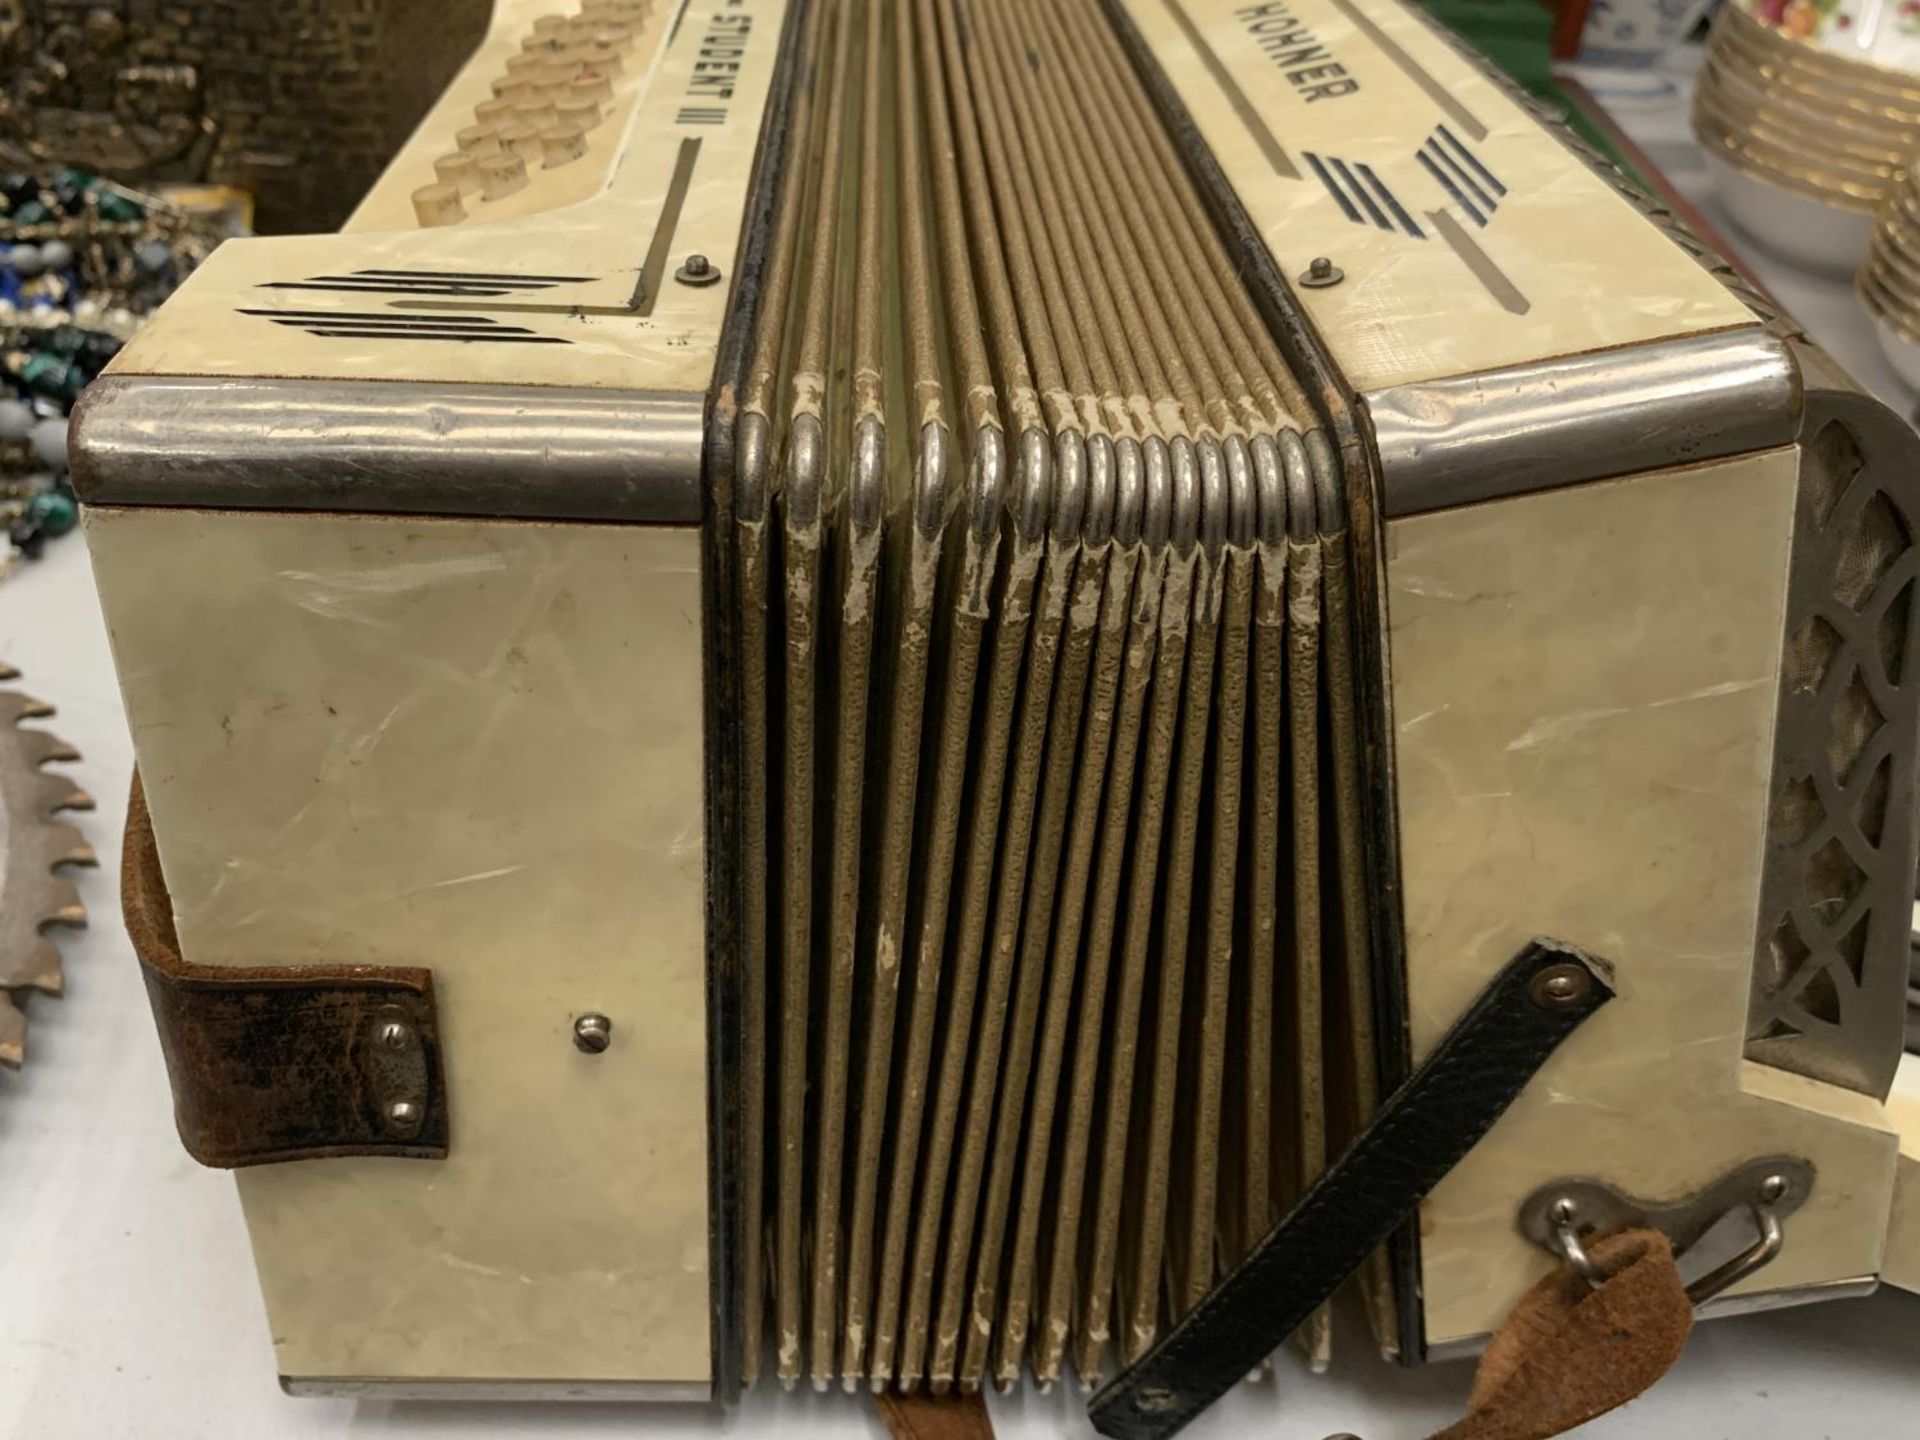 A HOHNER STUDENT III ACCORDIAN - Image 3 of 4